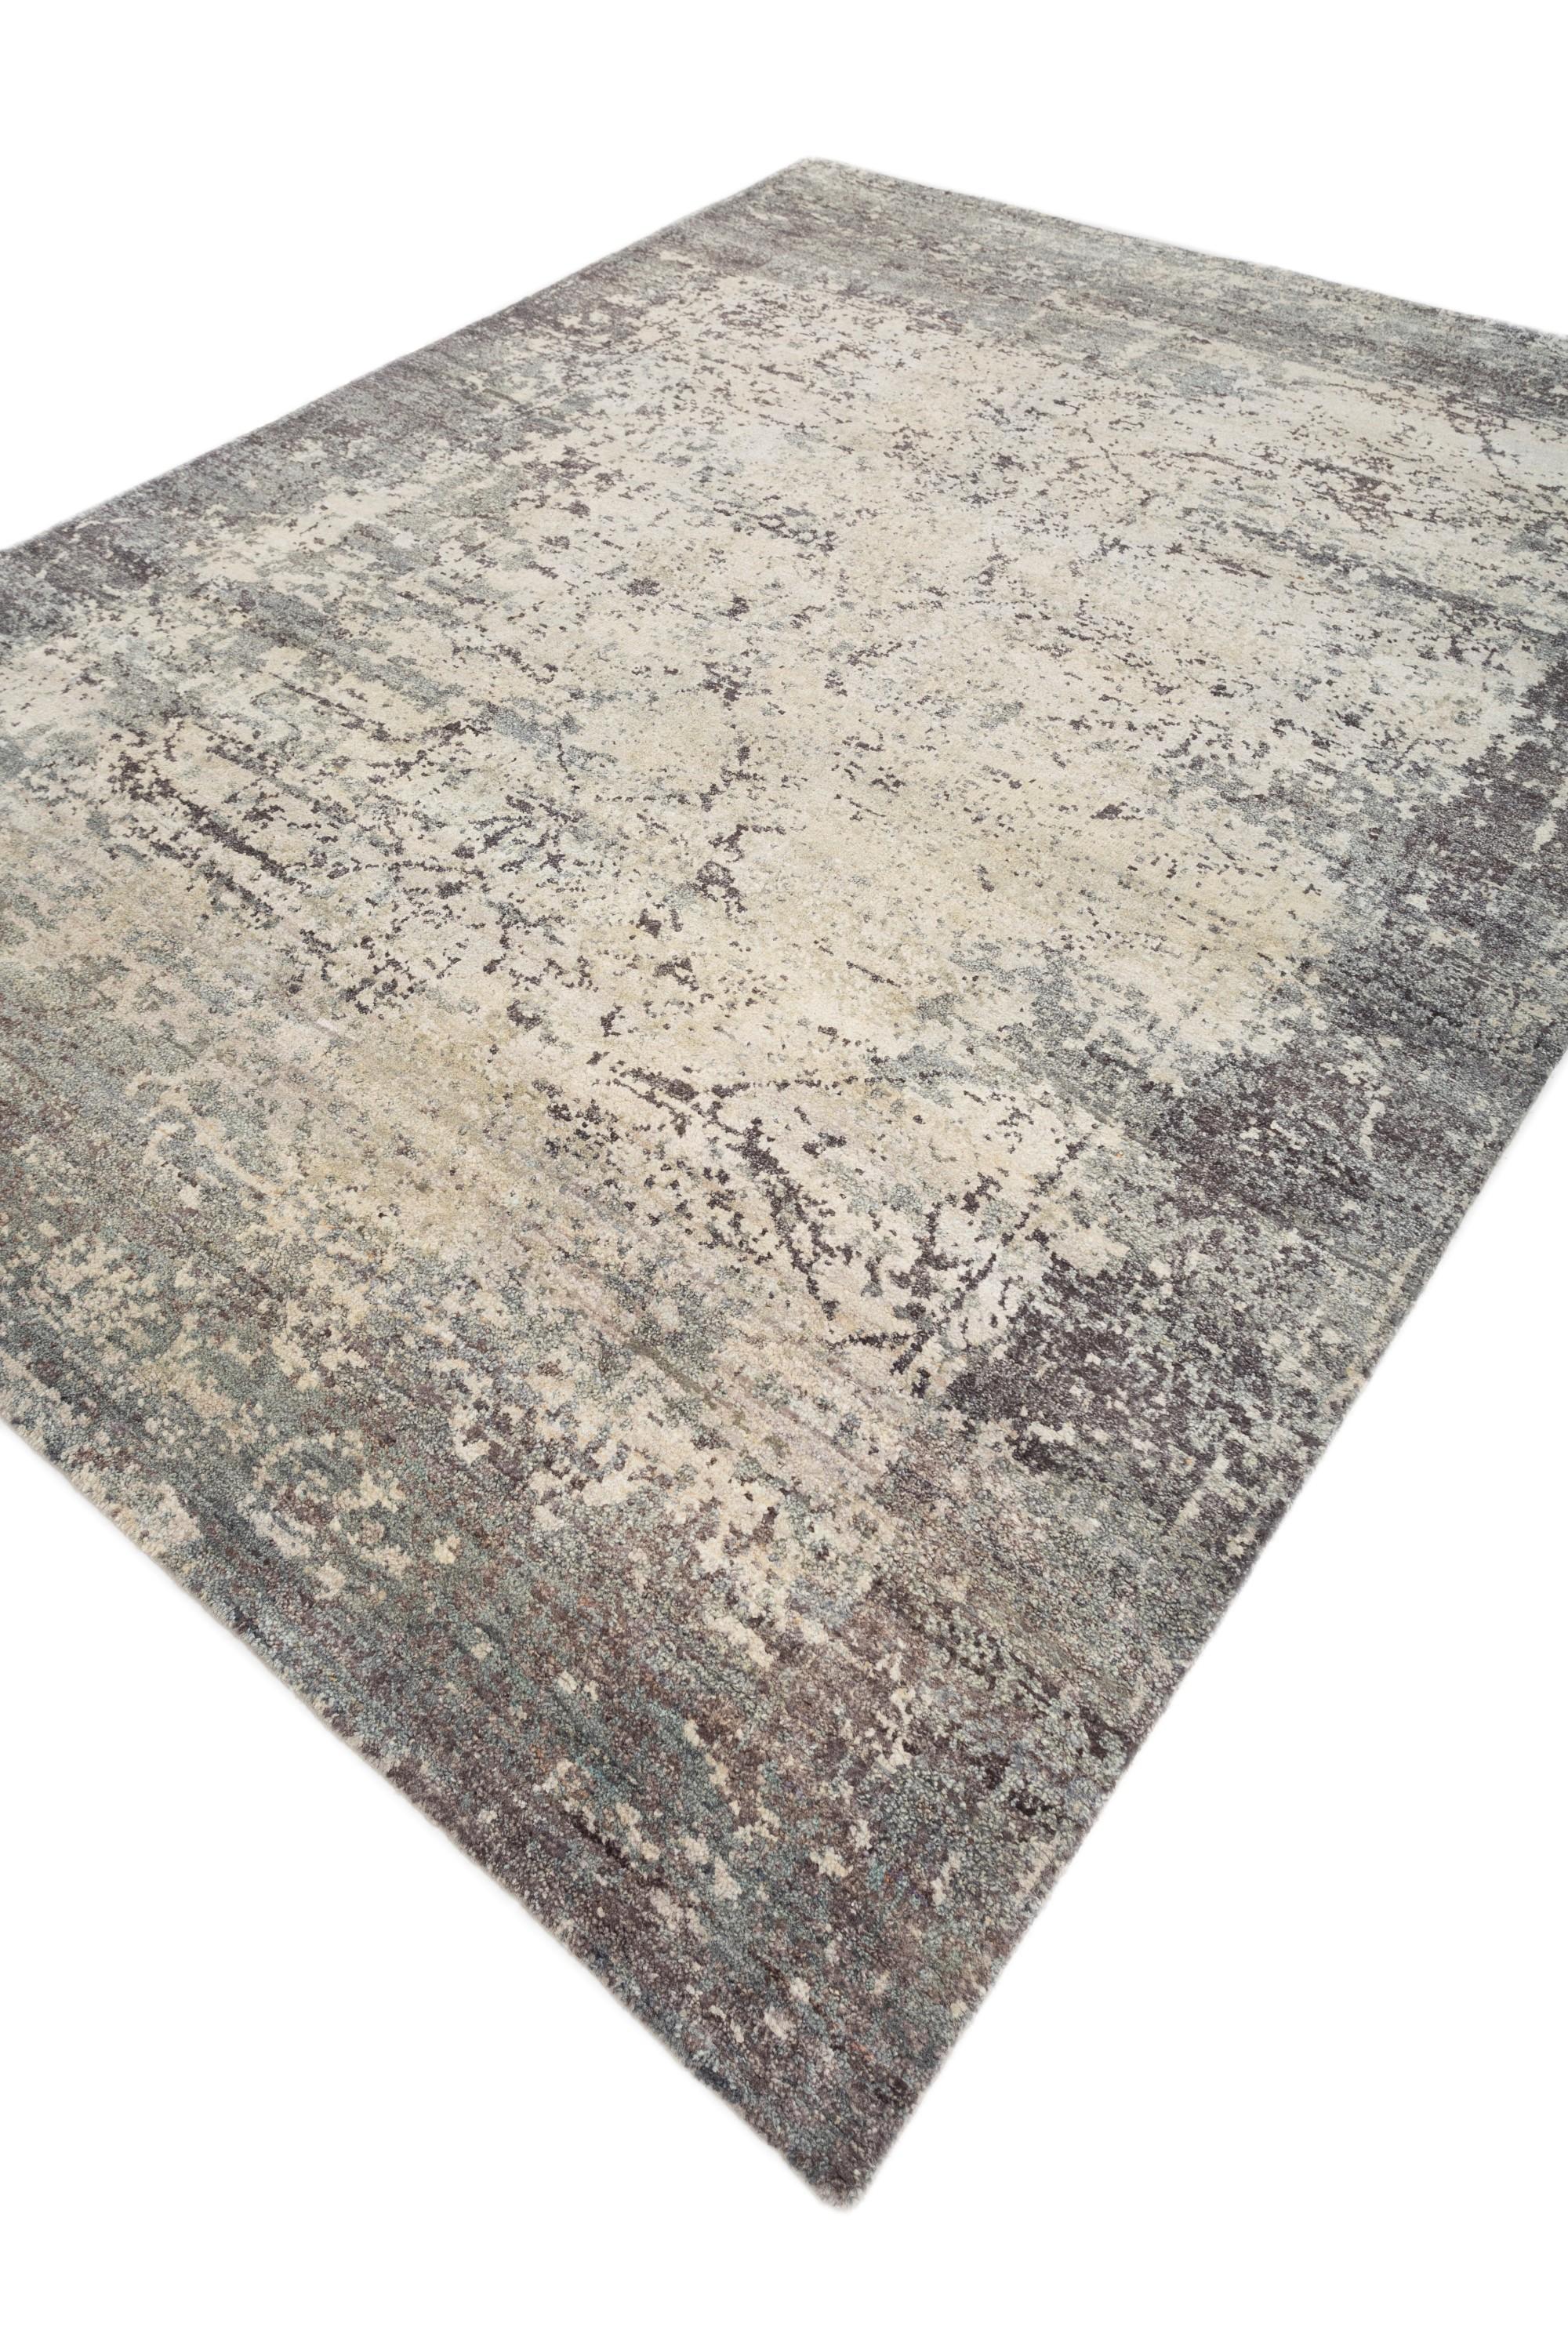 Indian Woodland Enigma Ashwood & Ashwood 240x300 cm Hand Knotted Rugs For Sale